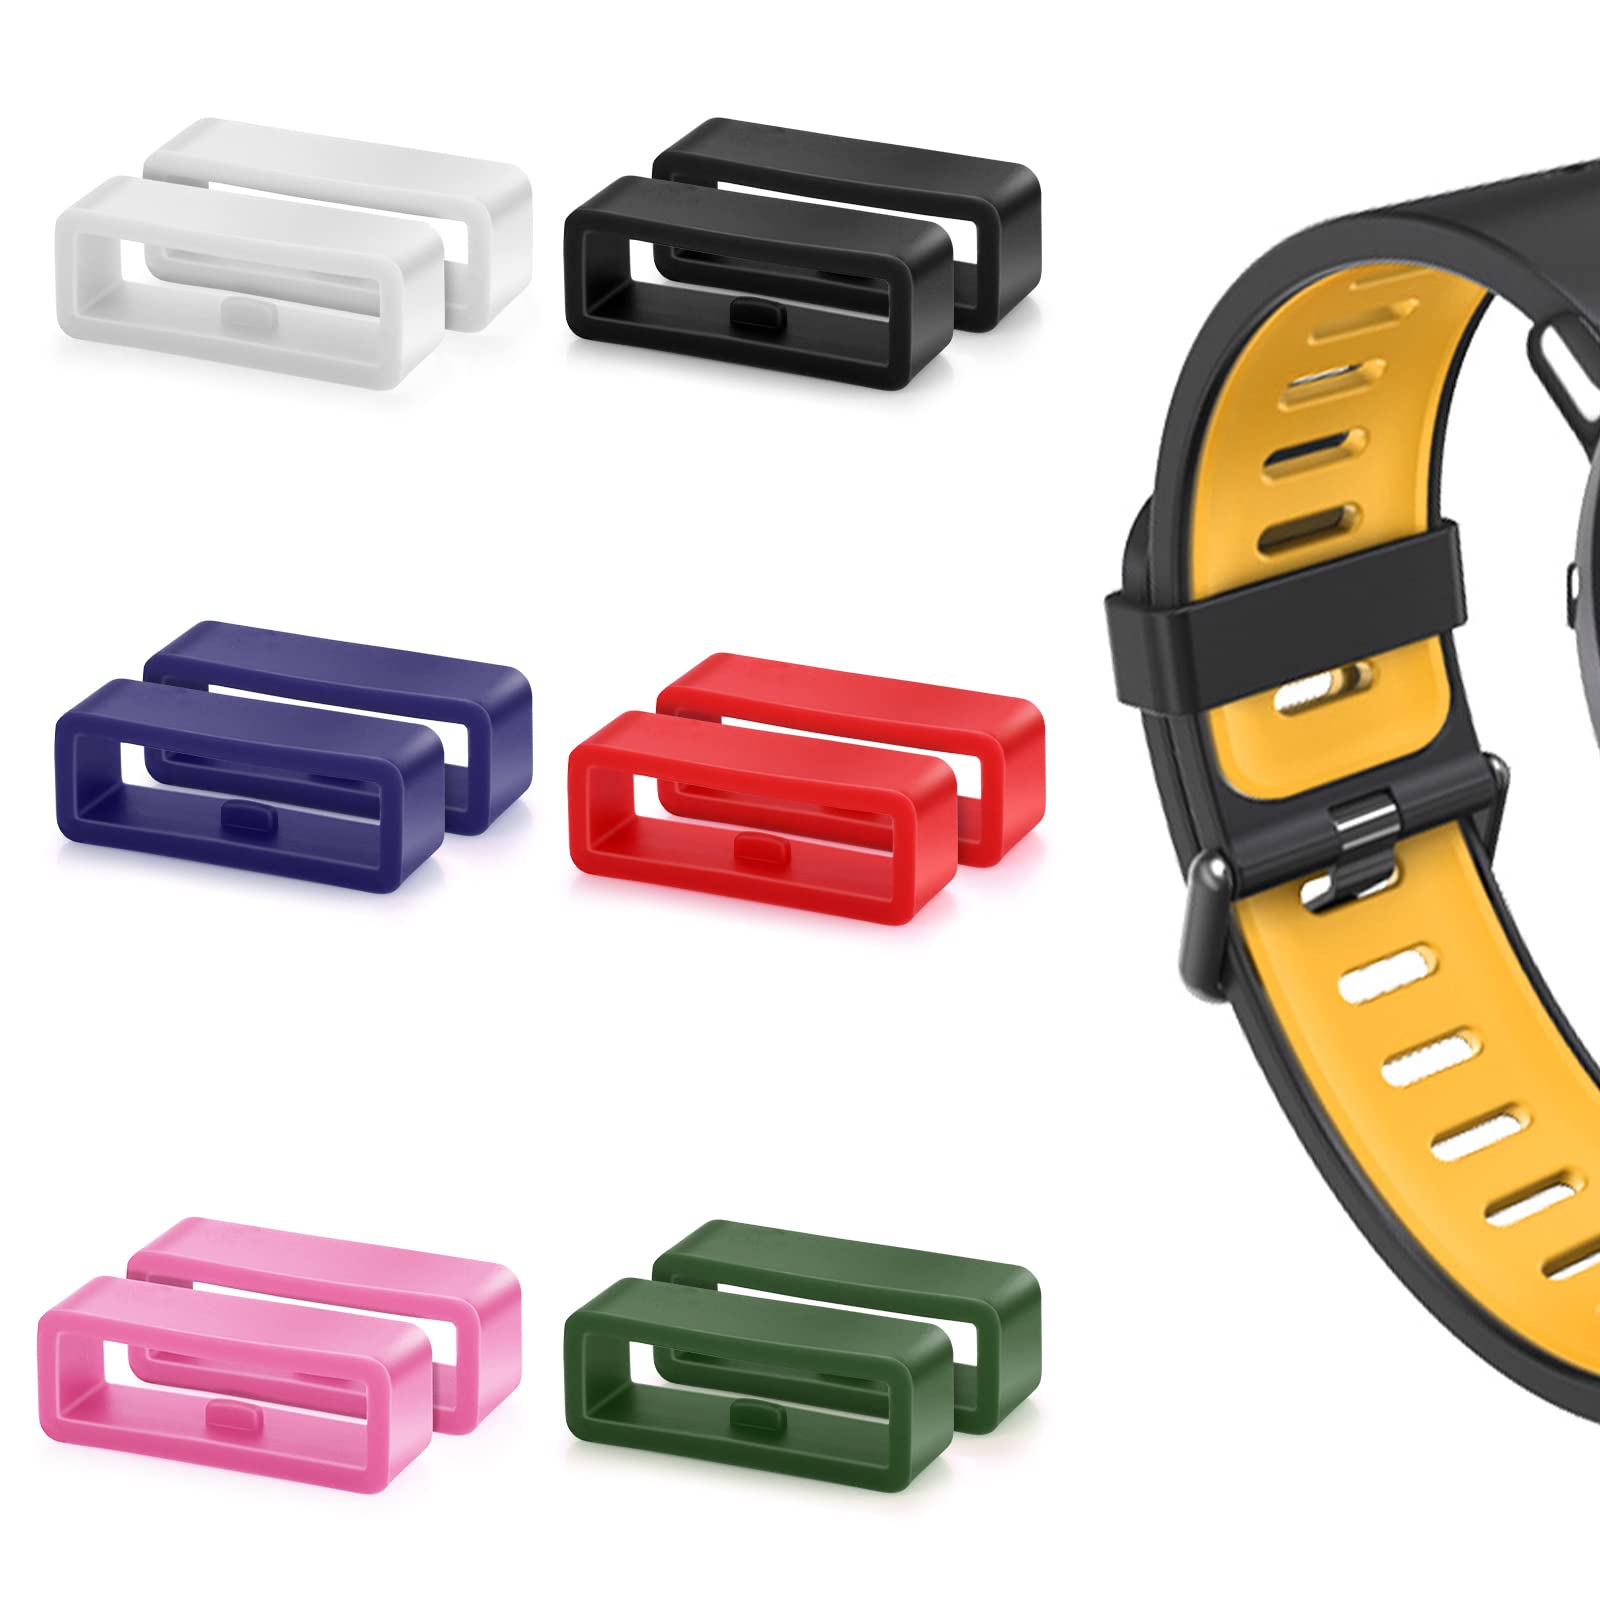 Cobee Watch Strap Loops, Watch Strap Keeper, Watch Band Retaining Hoop Loop Ring Retainer Holder, Silicone Replacement Watch Band Loop for Smart Sport Watches(4x18mm + 4x20mm + 4x22mm, 6 Colors)